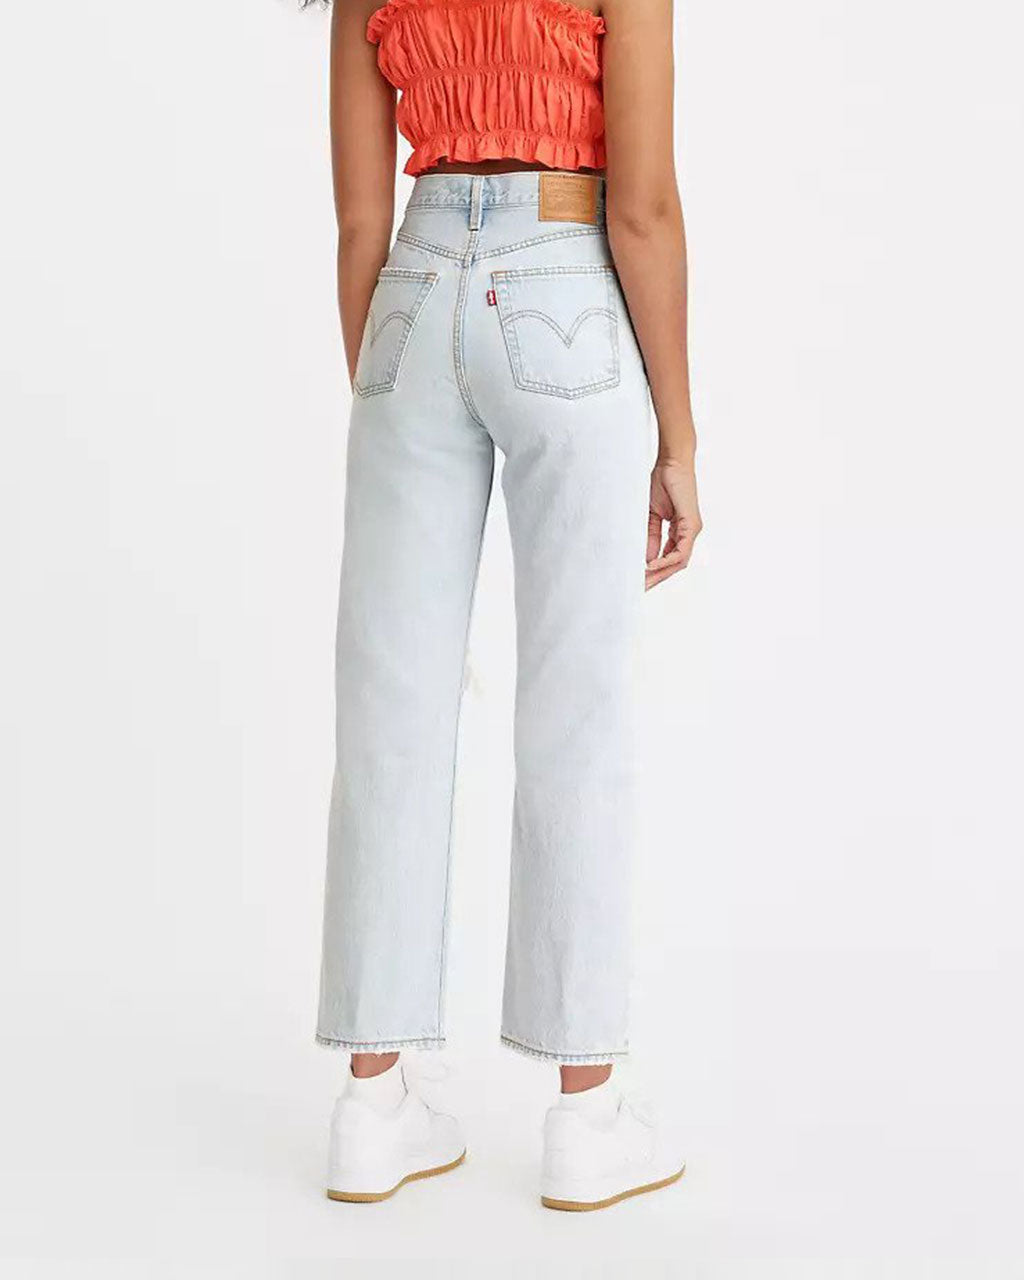 Ribcage Straight Ankle - Ojai Shore by Levi's - jeans 